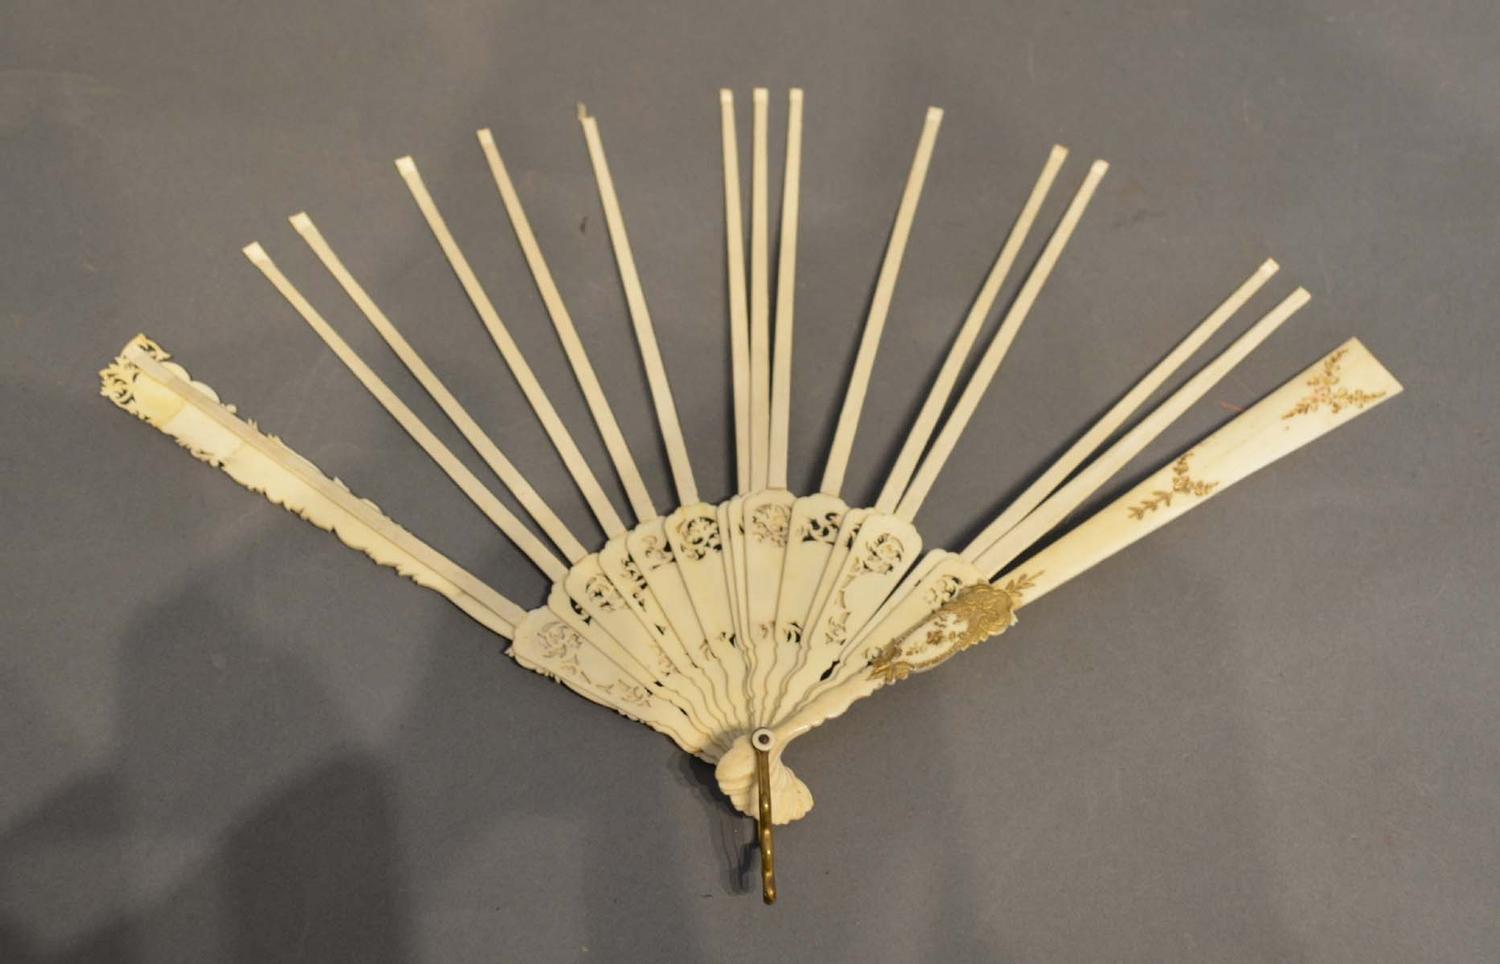 A Set of 19th Century Carved Sticks and Guards for a Fan, the sticks with pierced mother of pearl - Image 2 of 2